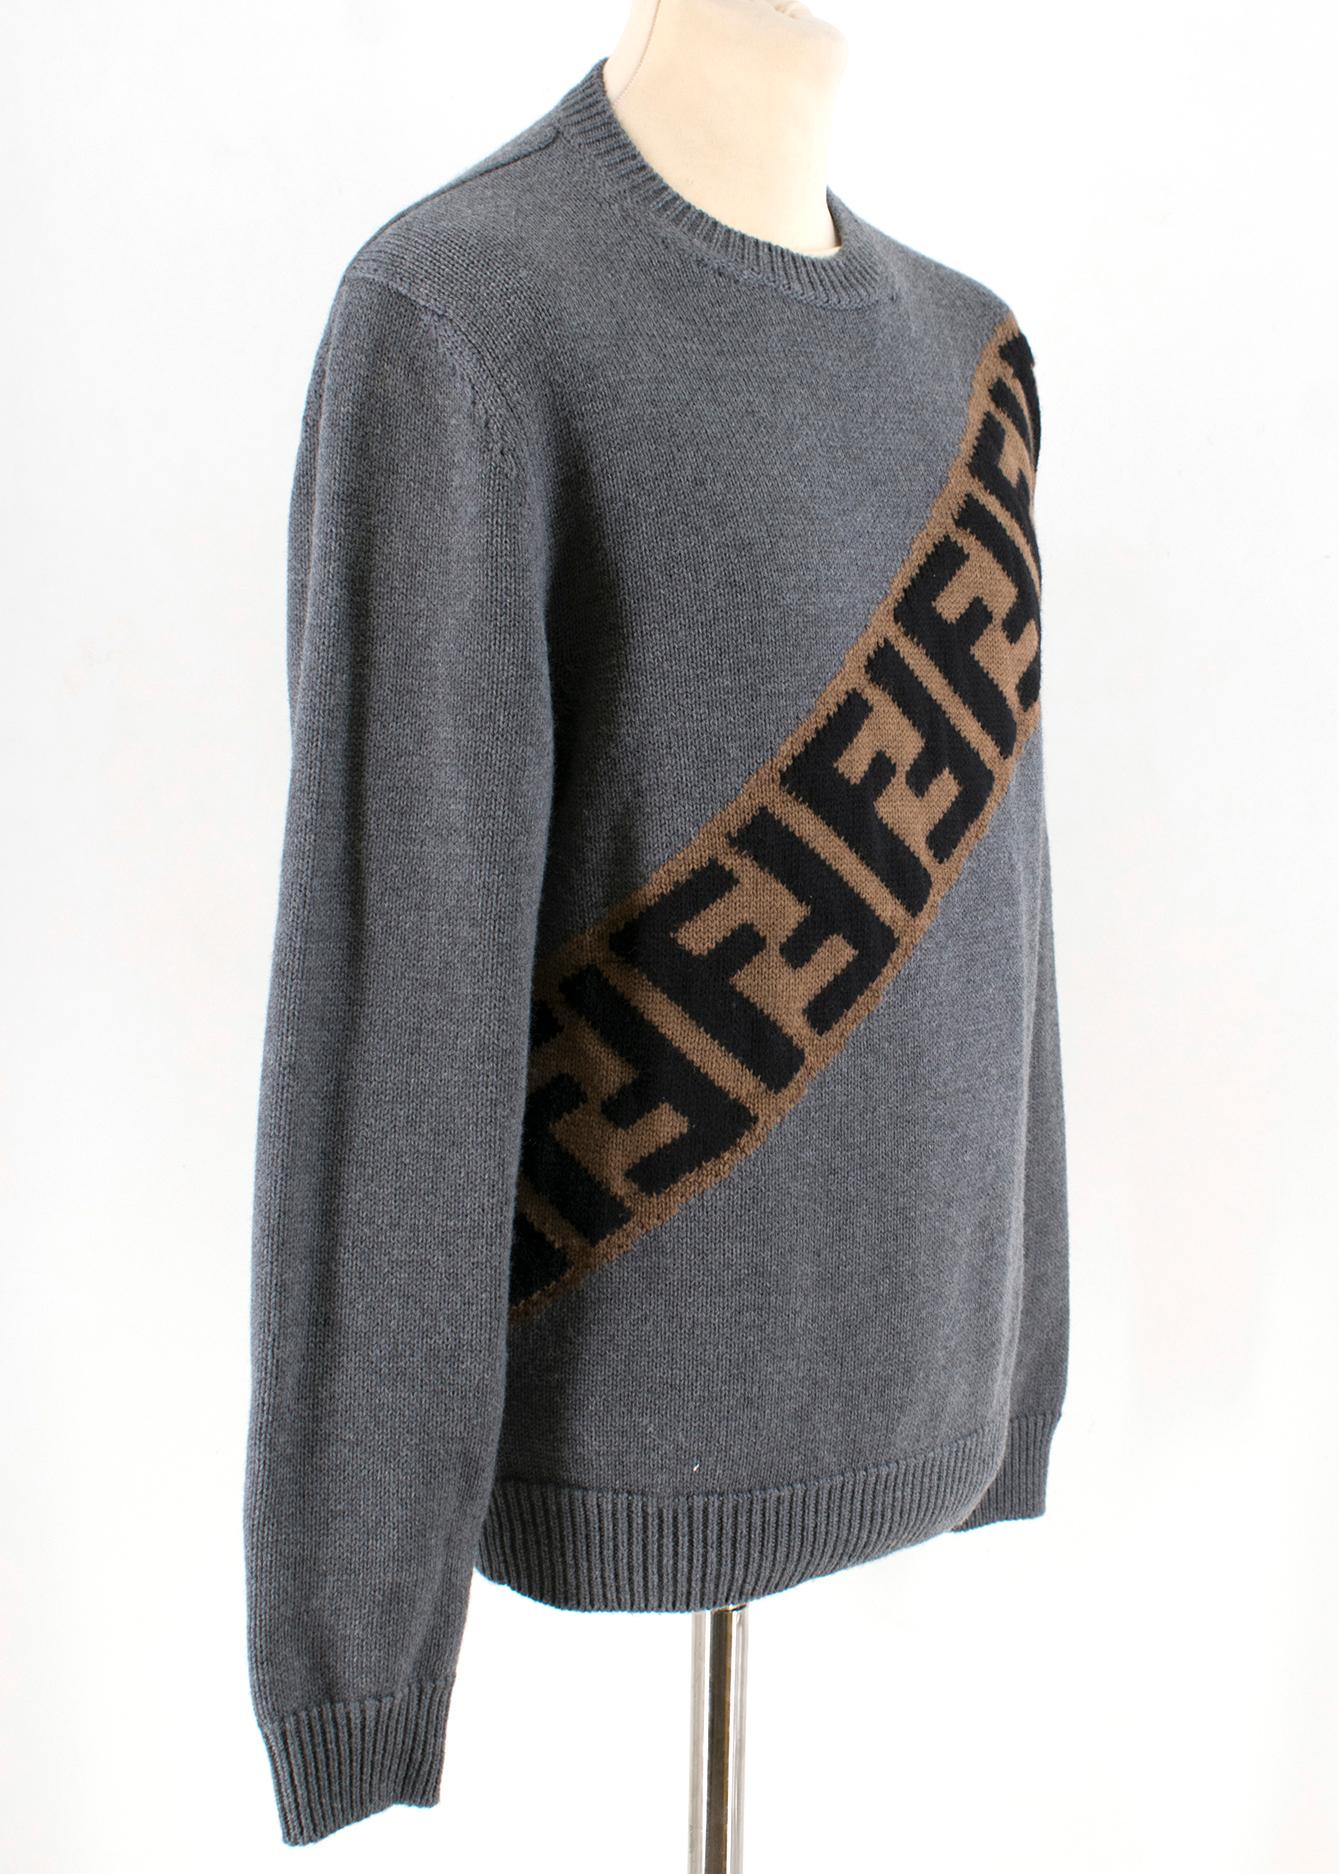 Fendi Grey FF Logo Knit Sweater

- Grey, knit jumper
- Brown and black FF motif logo print
- Long sleeved
- Ribbed hem, cuffs and collar
- Decorative black button detail at hem

Please note, these items are pre-owned and may show some signs of